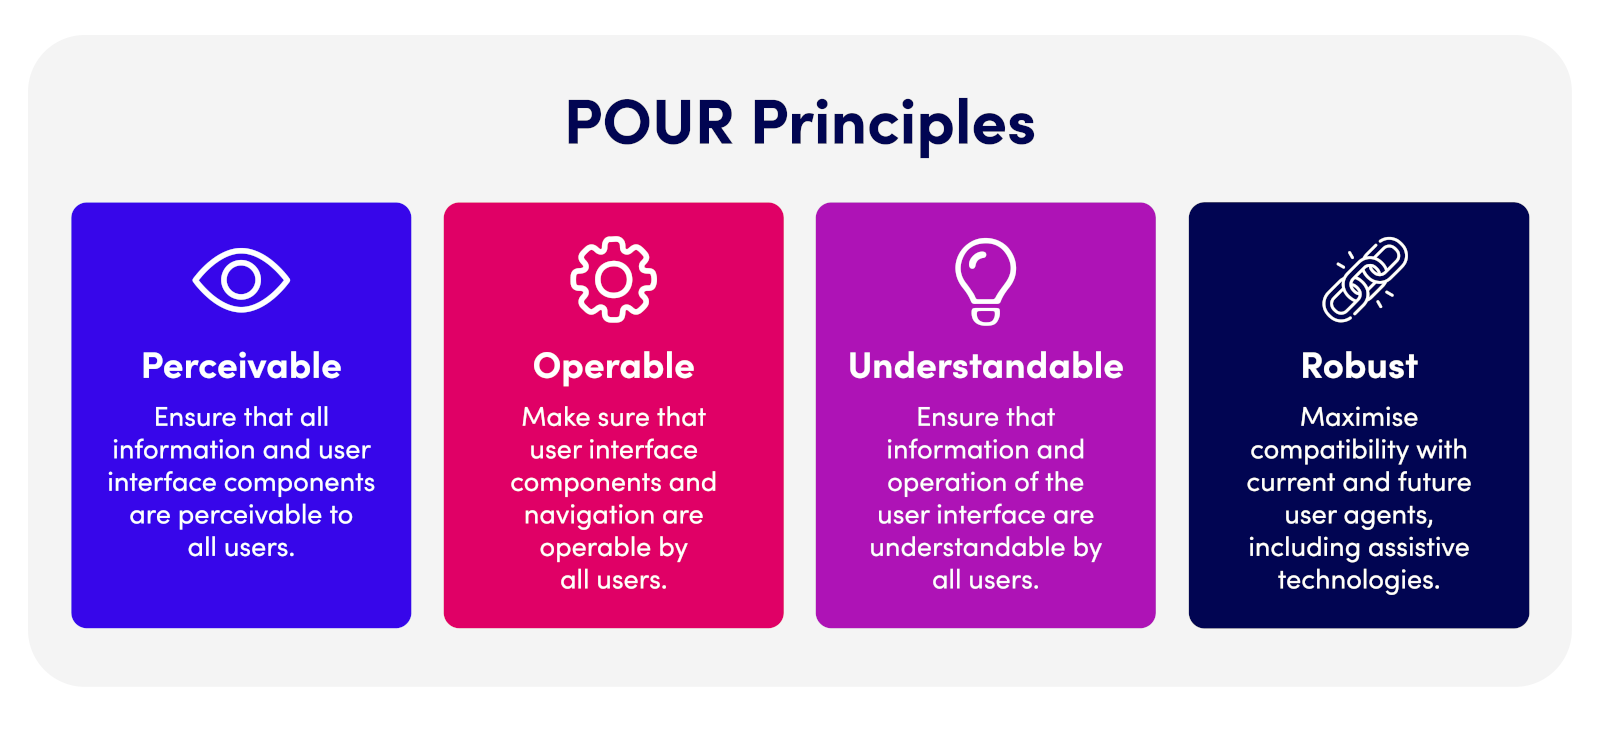 The Inclusive design principles: perceivable, operable, understandable and robust